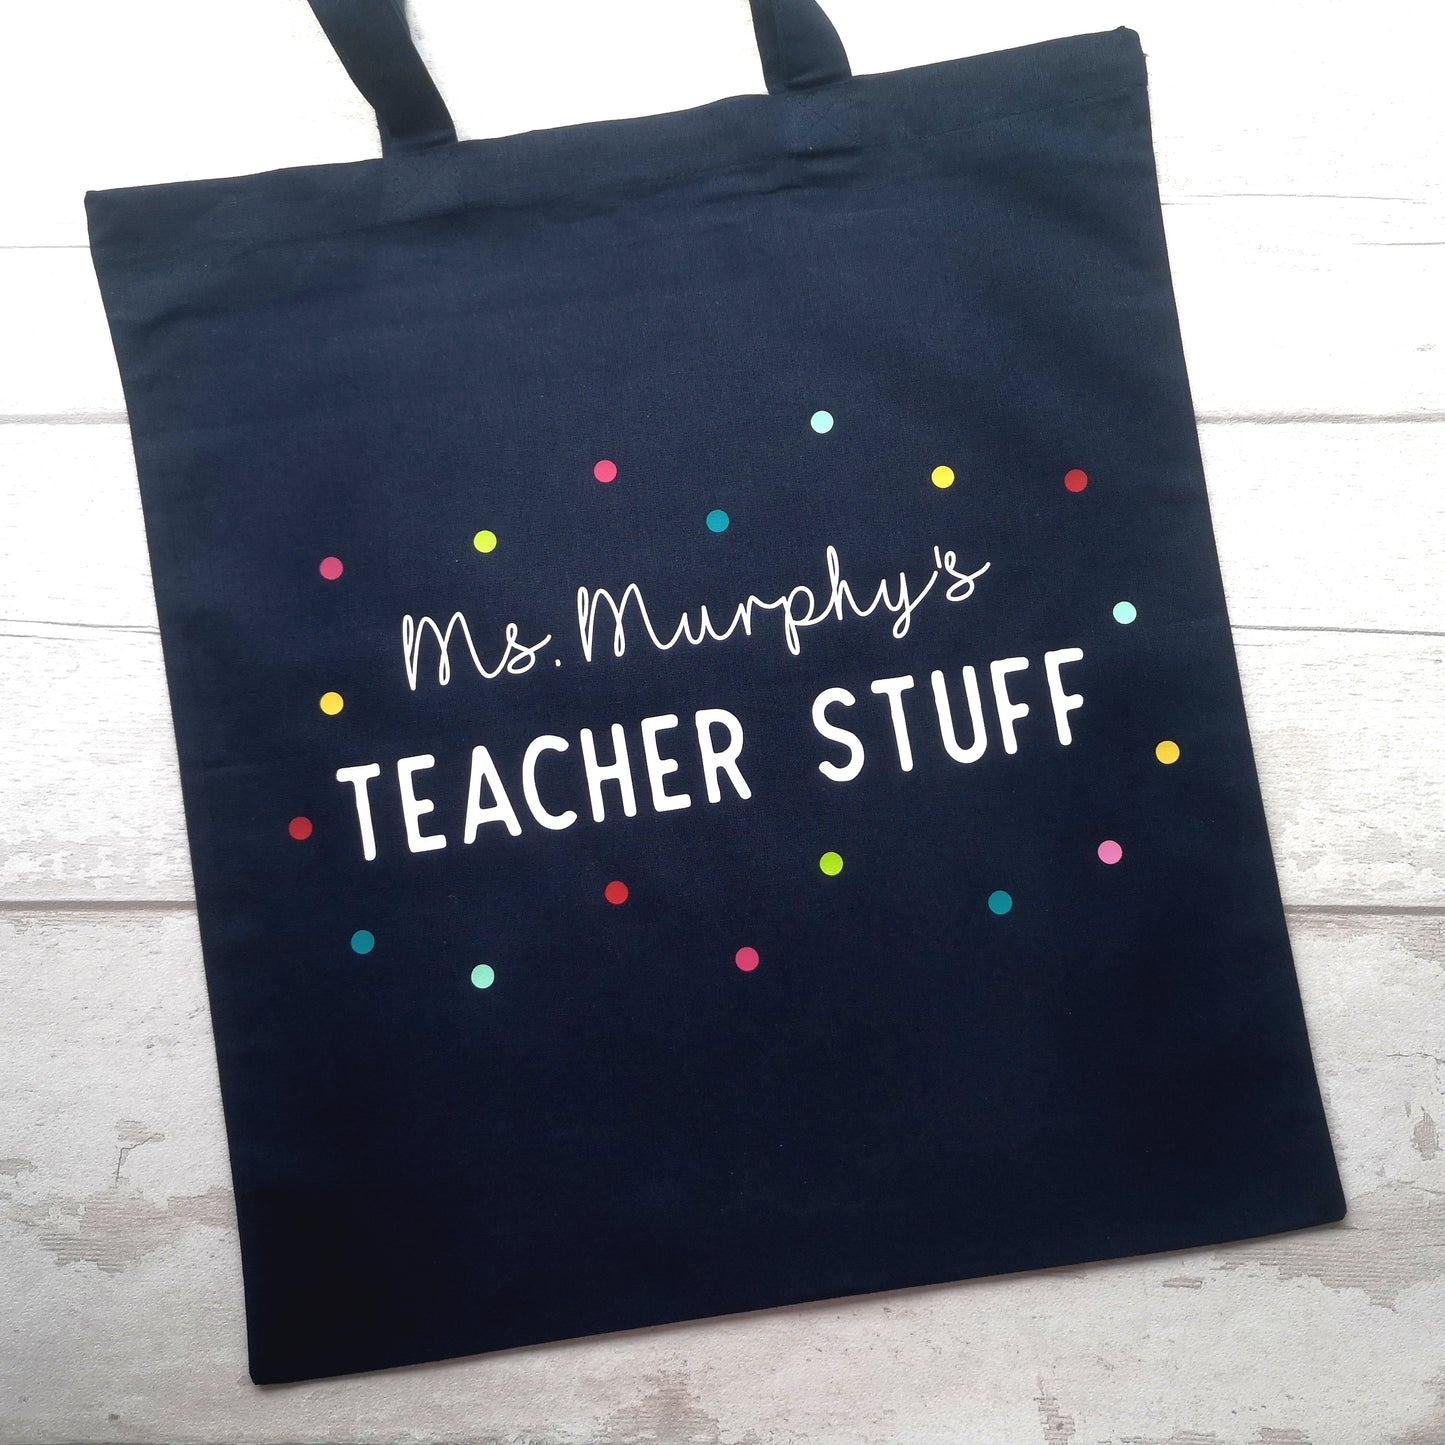 A personalised lightweight black cotton tote with <Name>'s TEACHER STUFF on it. The text is surrounded with multicoloured polkadots